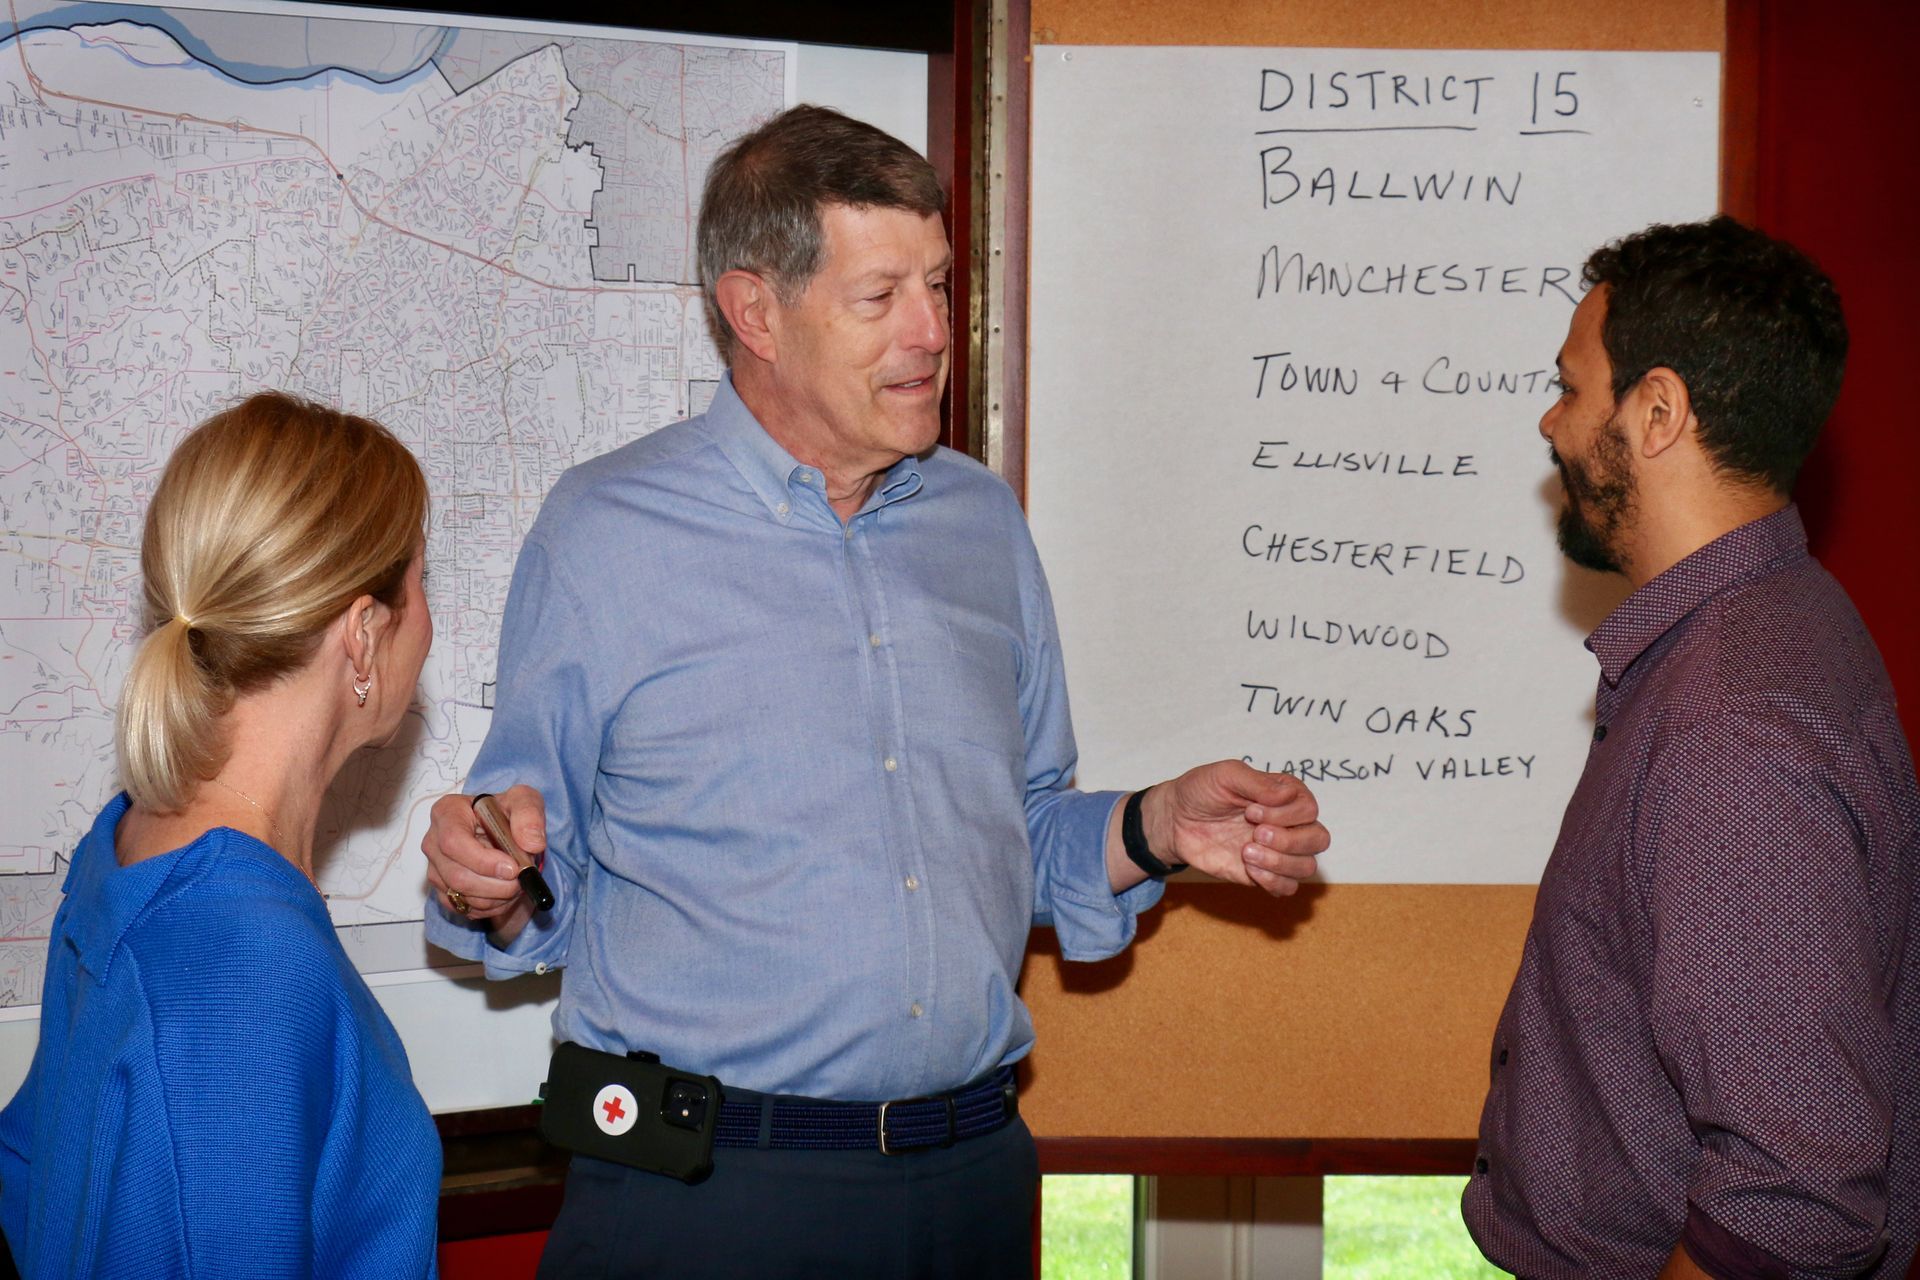 Joe Pereles and two other people are standing in front of a whiteboard that says district 15.